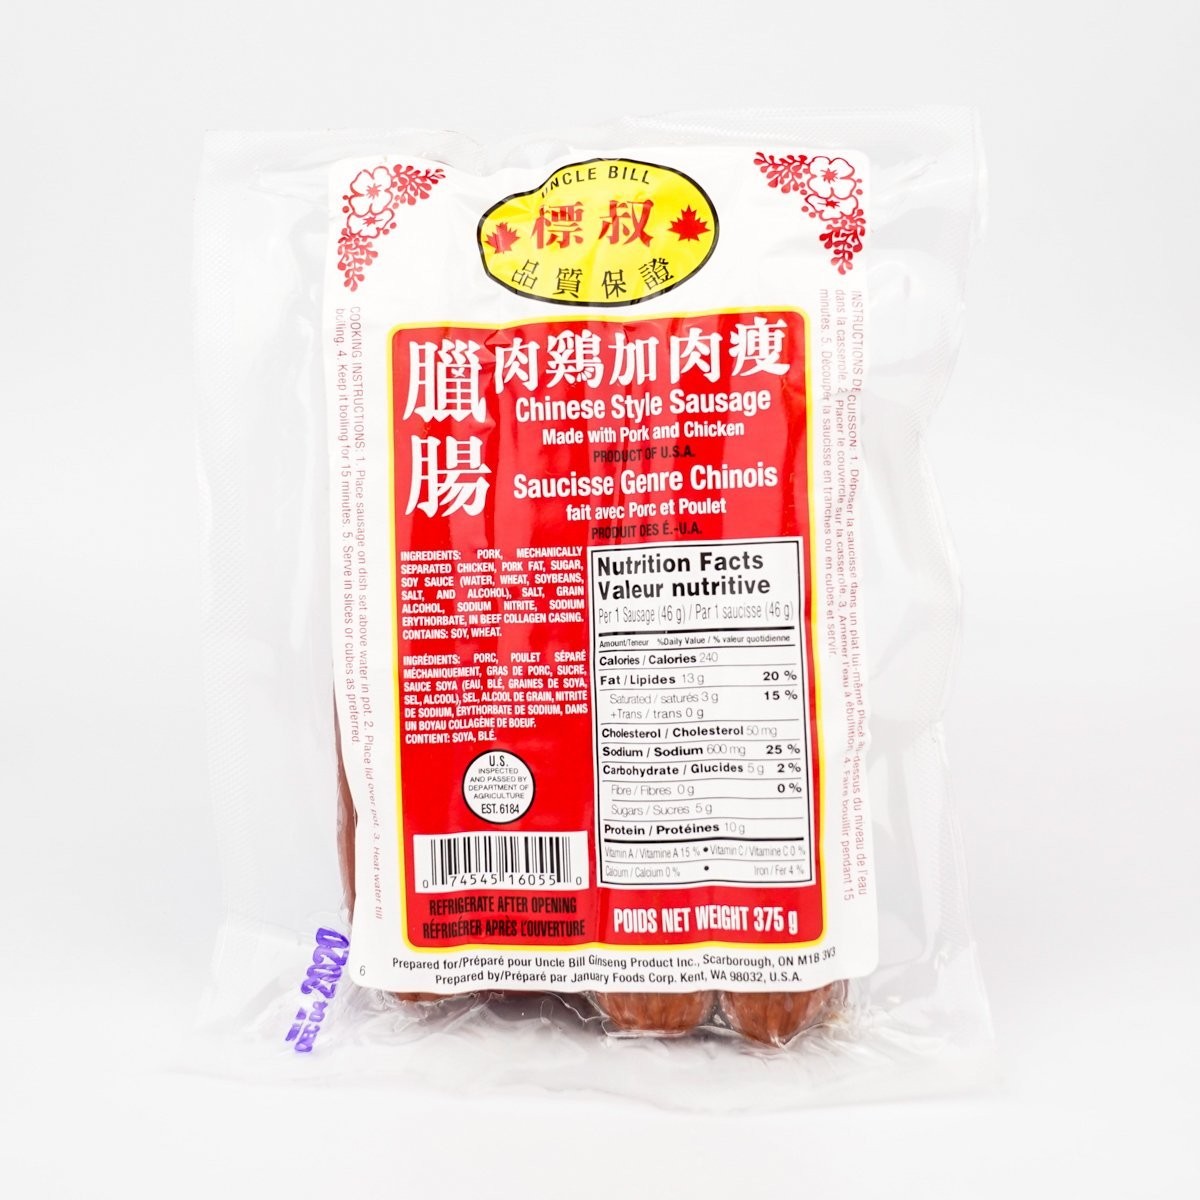 uncle-bill-chinese-style-sausage-pork-and-chicken